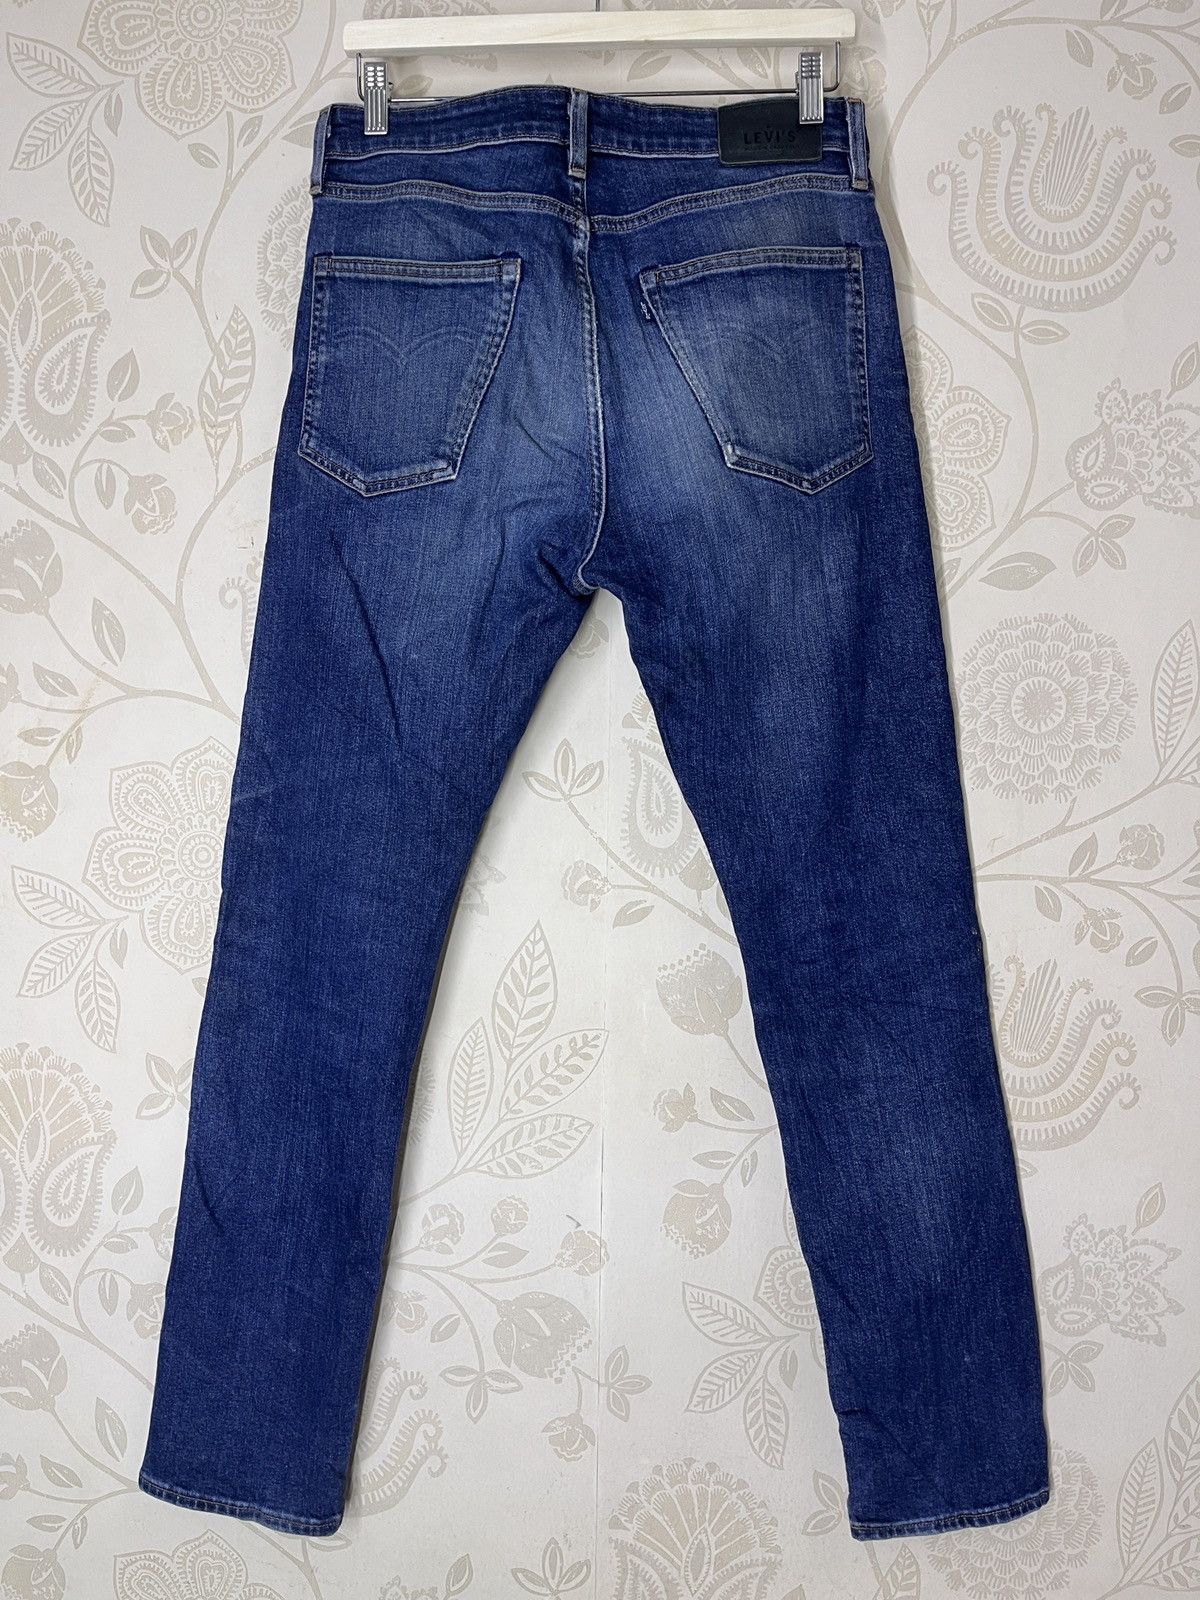 Levis Made & Crafted Blue Label Distressed Denim Jeans - 2